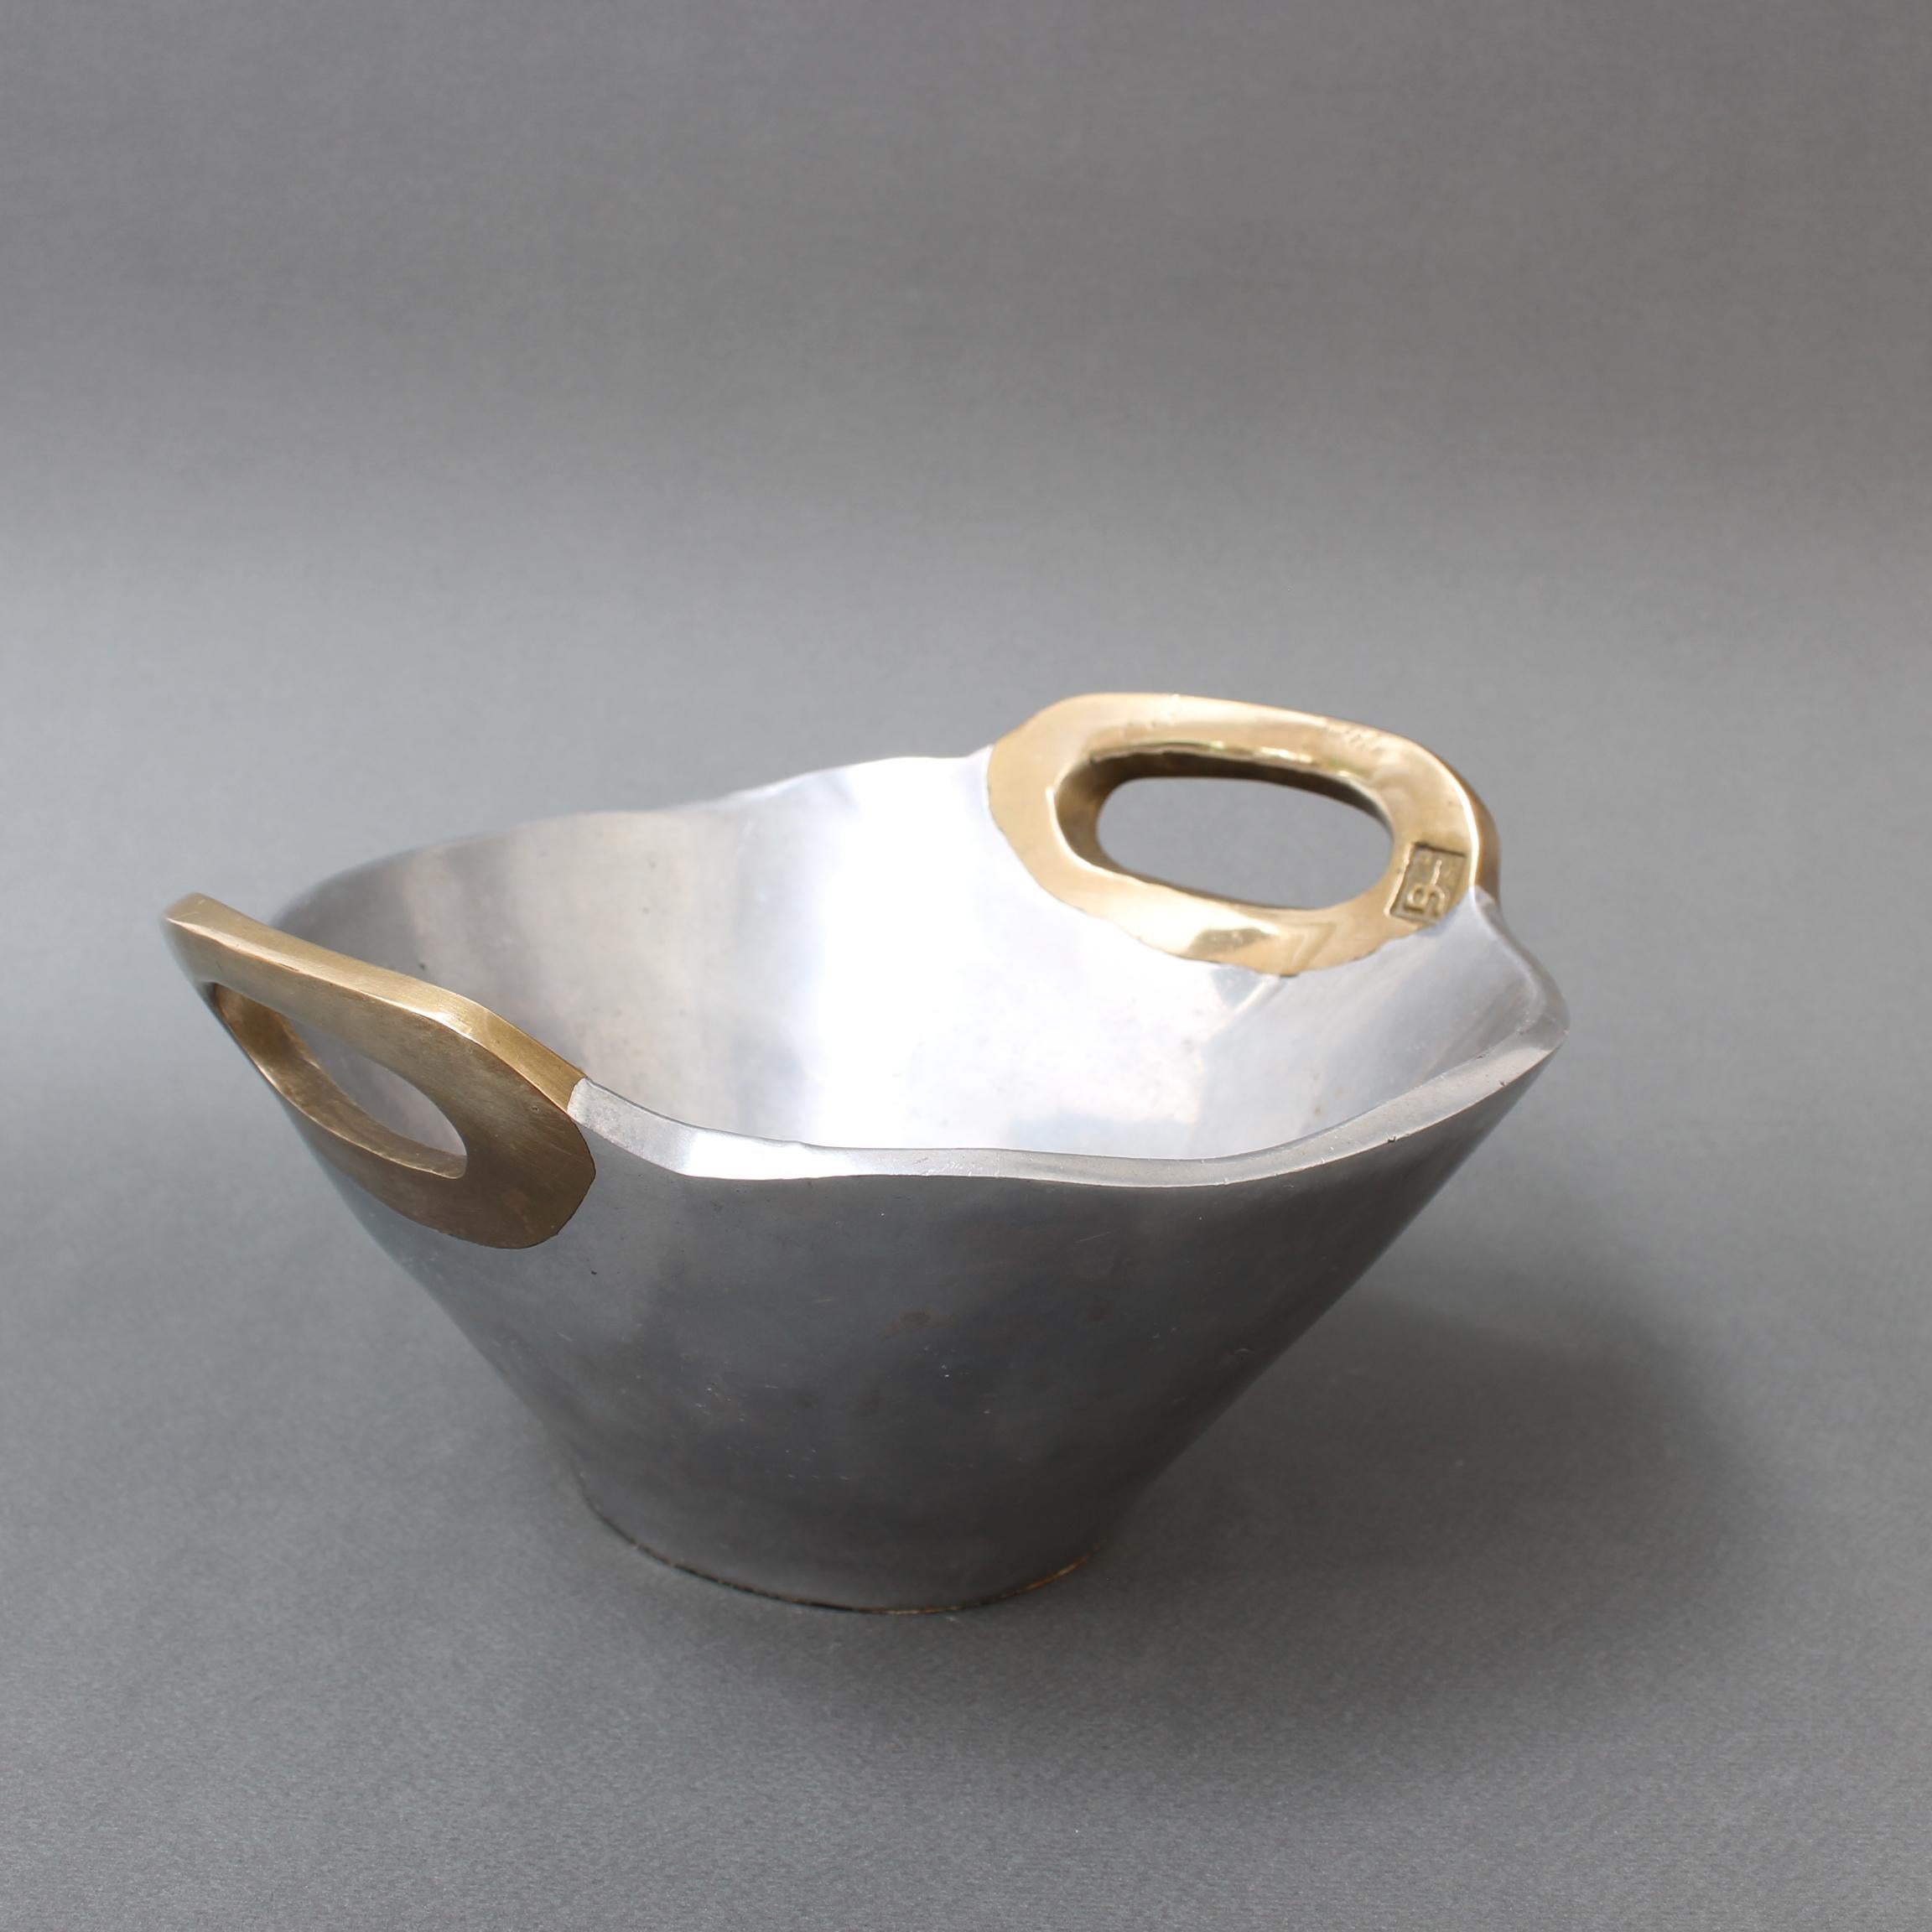 Aluminium and brass bowl by David Marshall (circa 1980s). A stunning piece, Its solidity and heft are reassuring and its tactility, sensuous. The maker's mark is impressed on the inner surface of the brass handle. The underside has the trademark